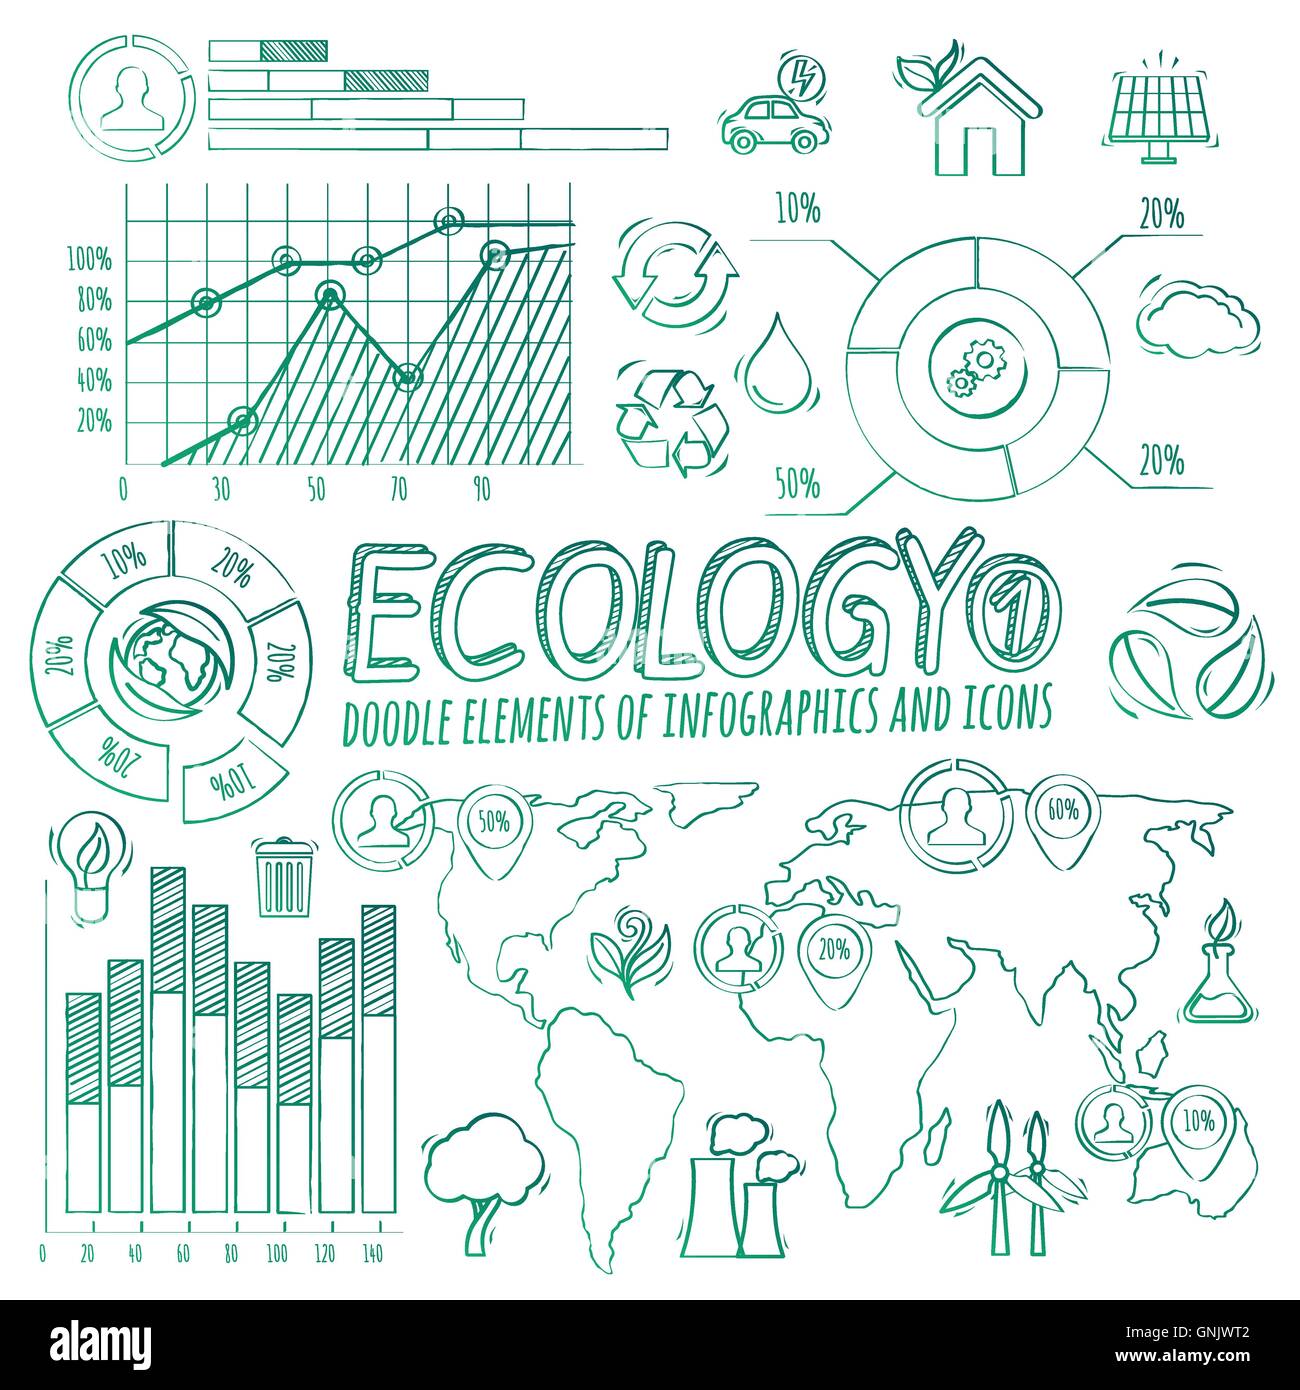 Ecology Doodle Infographic Elements Stock Vector